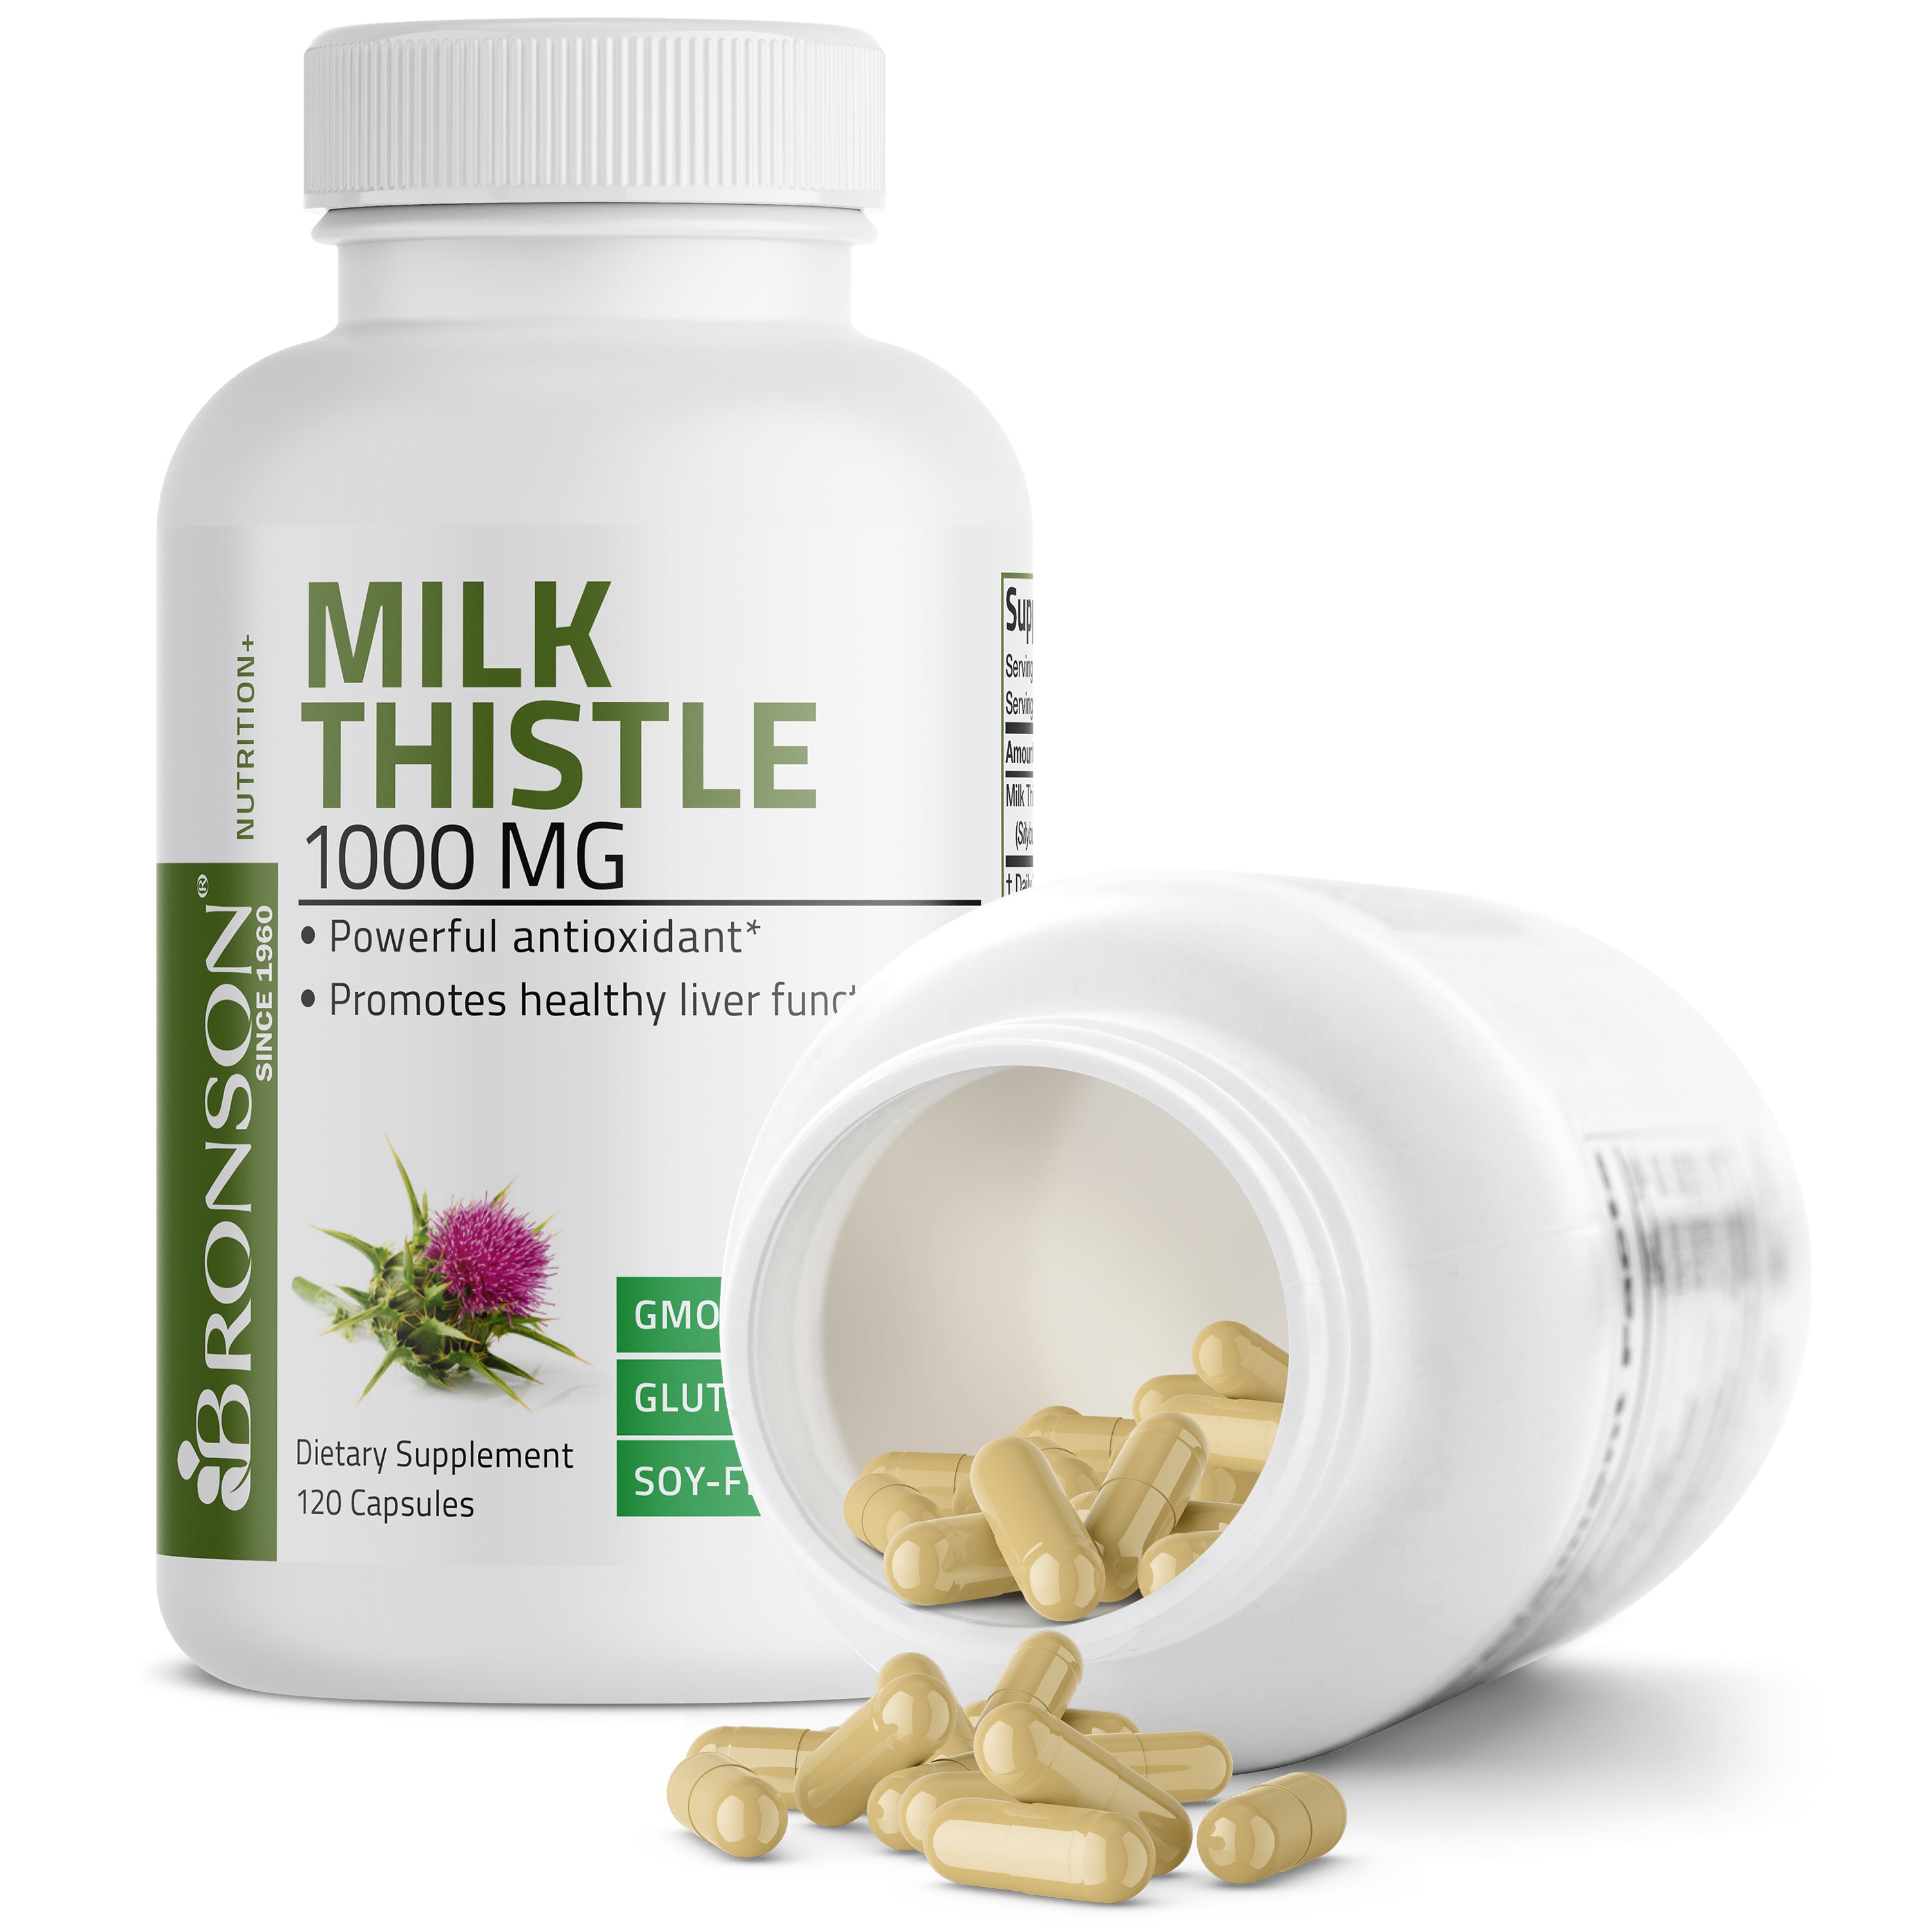 Milk Thistle - 1,000 mg view 4 of 6